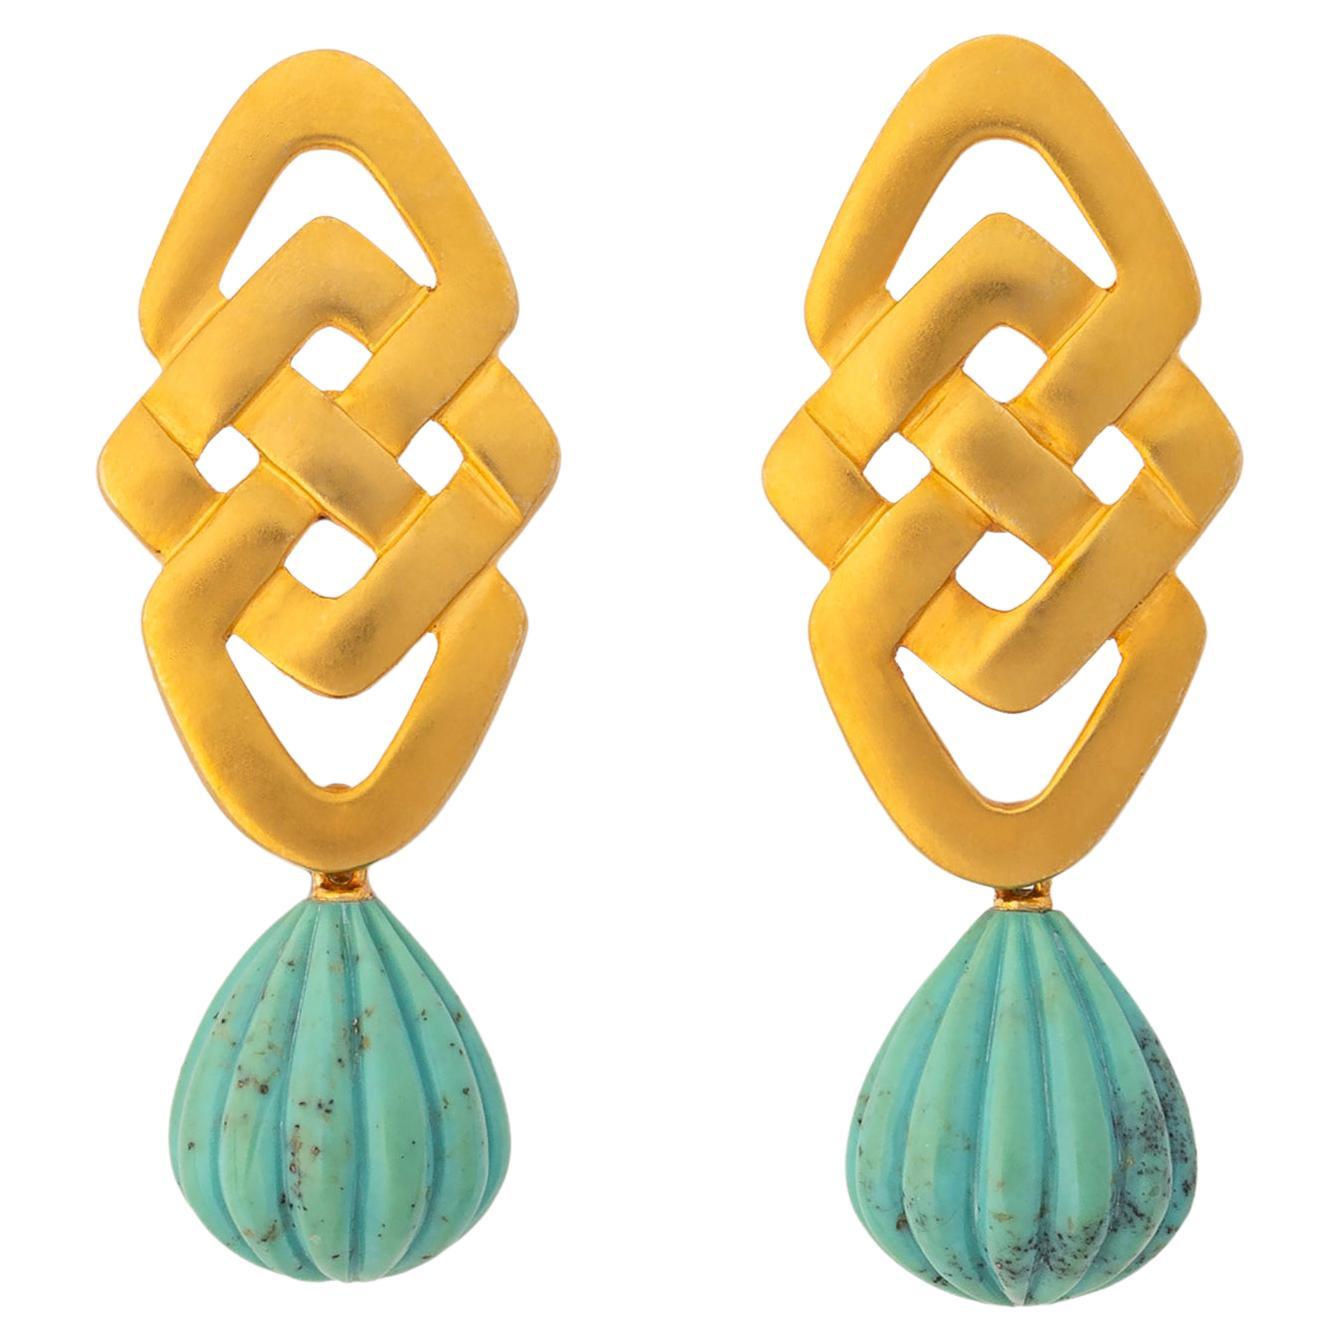 Ilias Lalaounis Turquoise and Gold Drop Earrings.